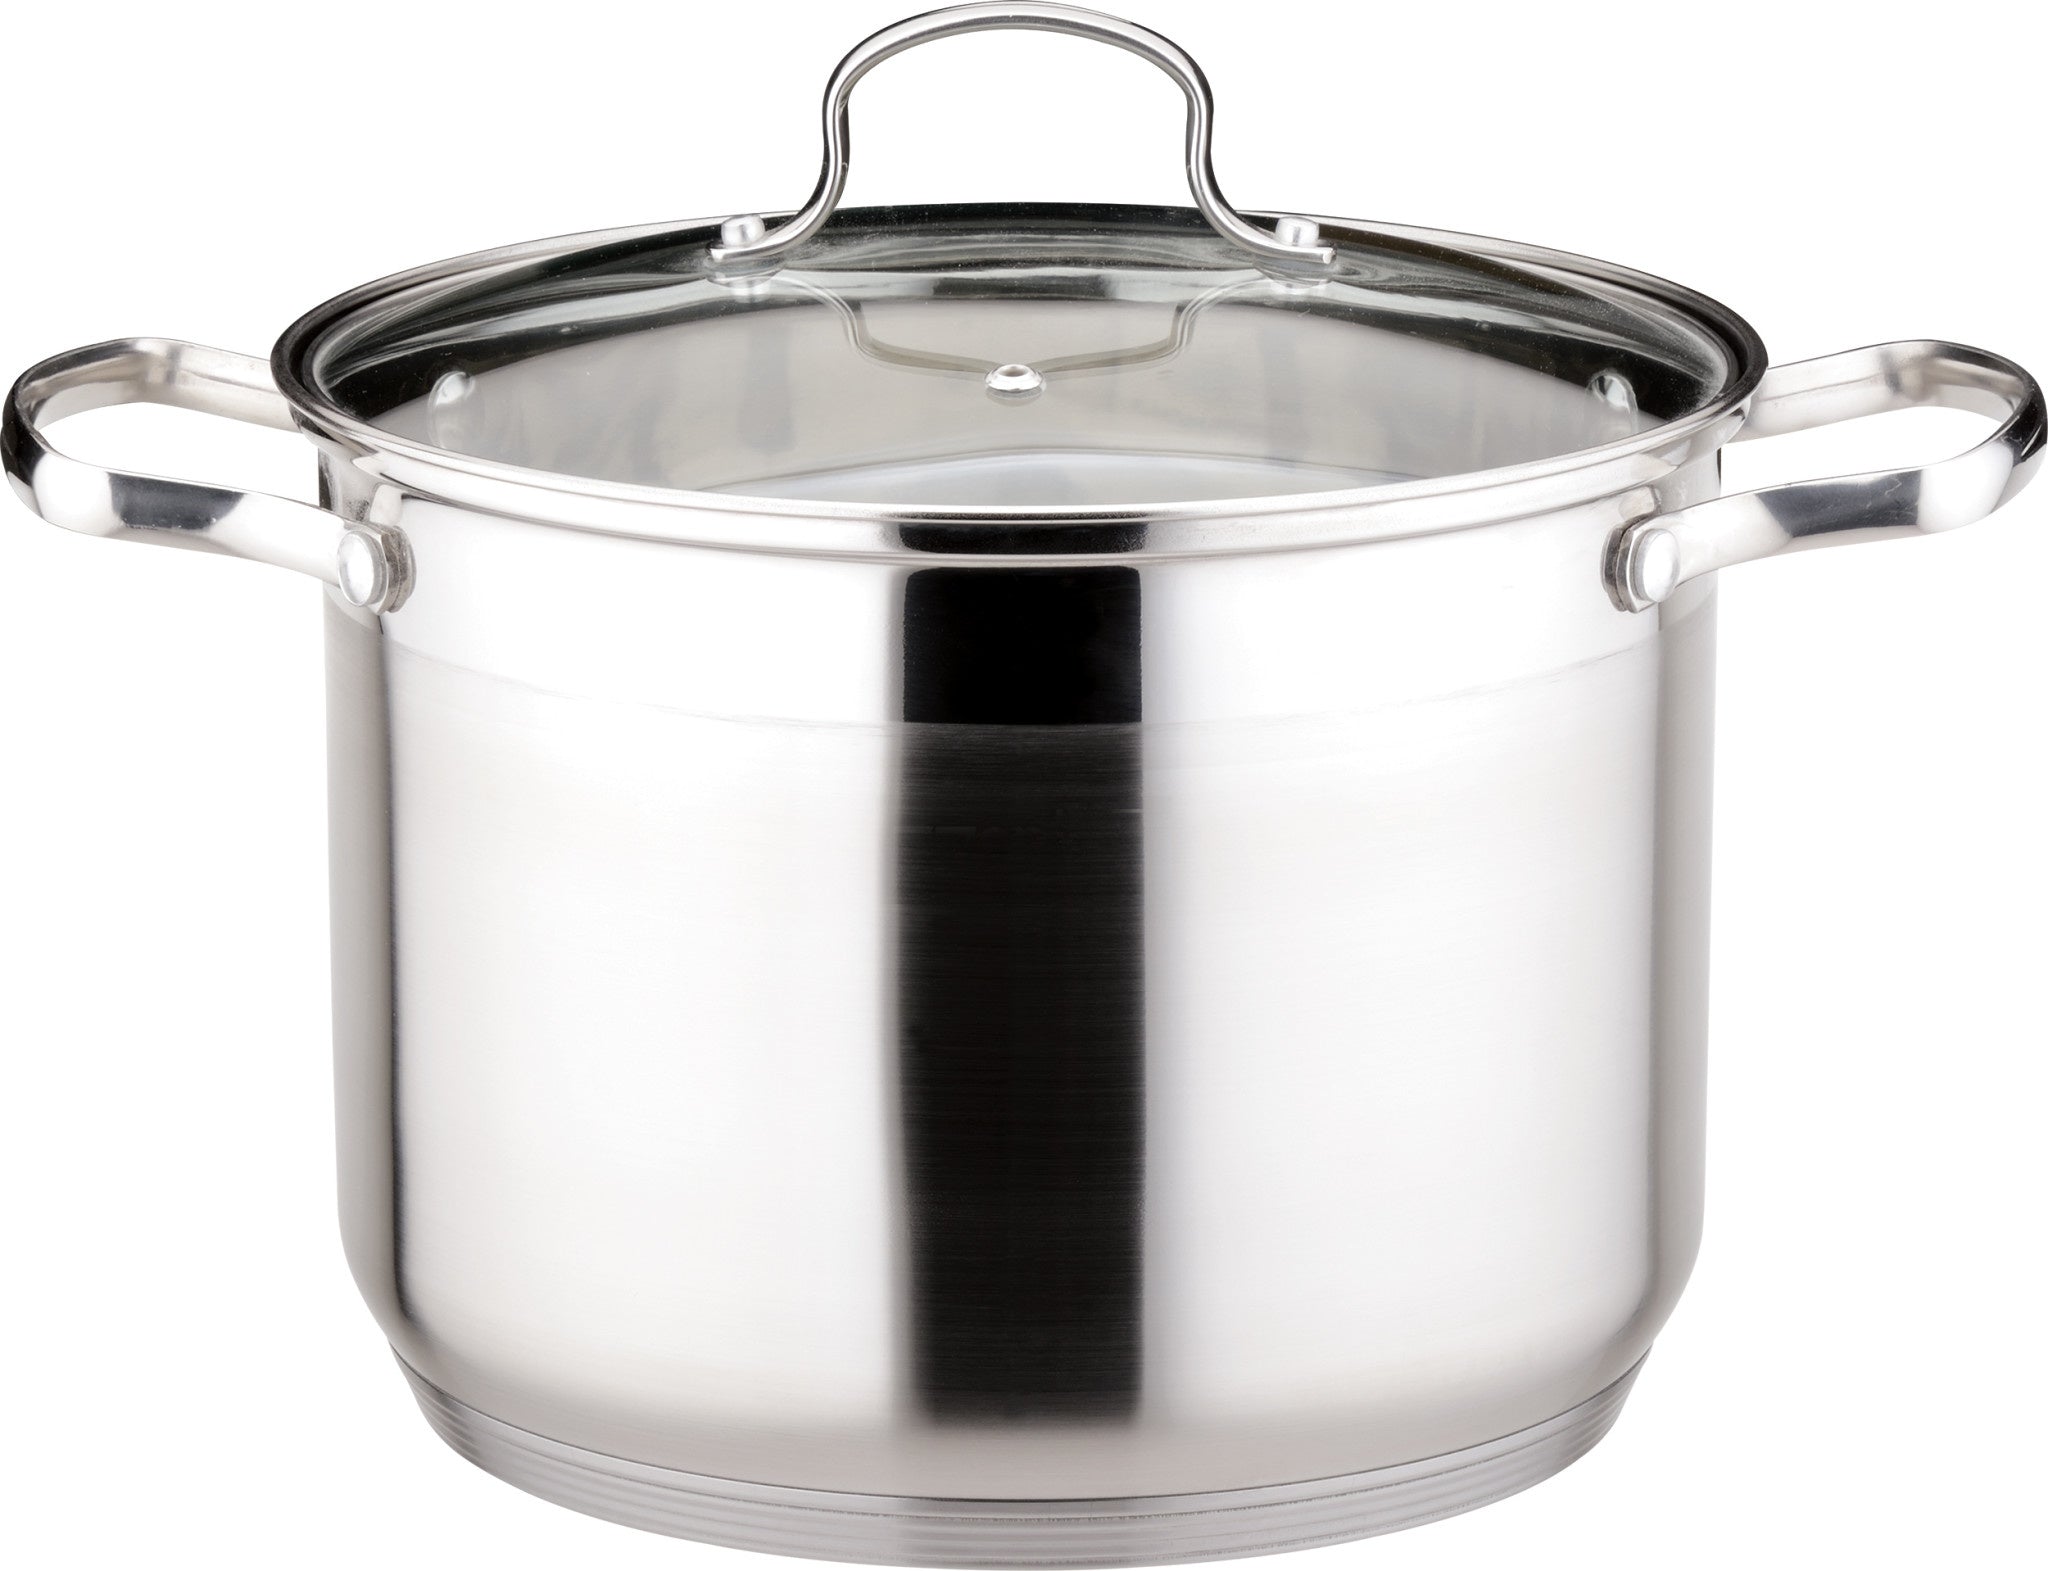 Metro Cookwares Stainless Steel Air Pot 2.5L – Black and Silver